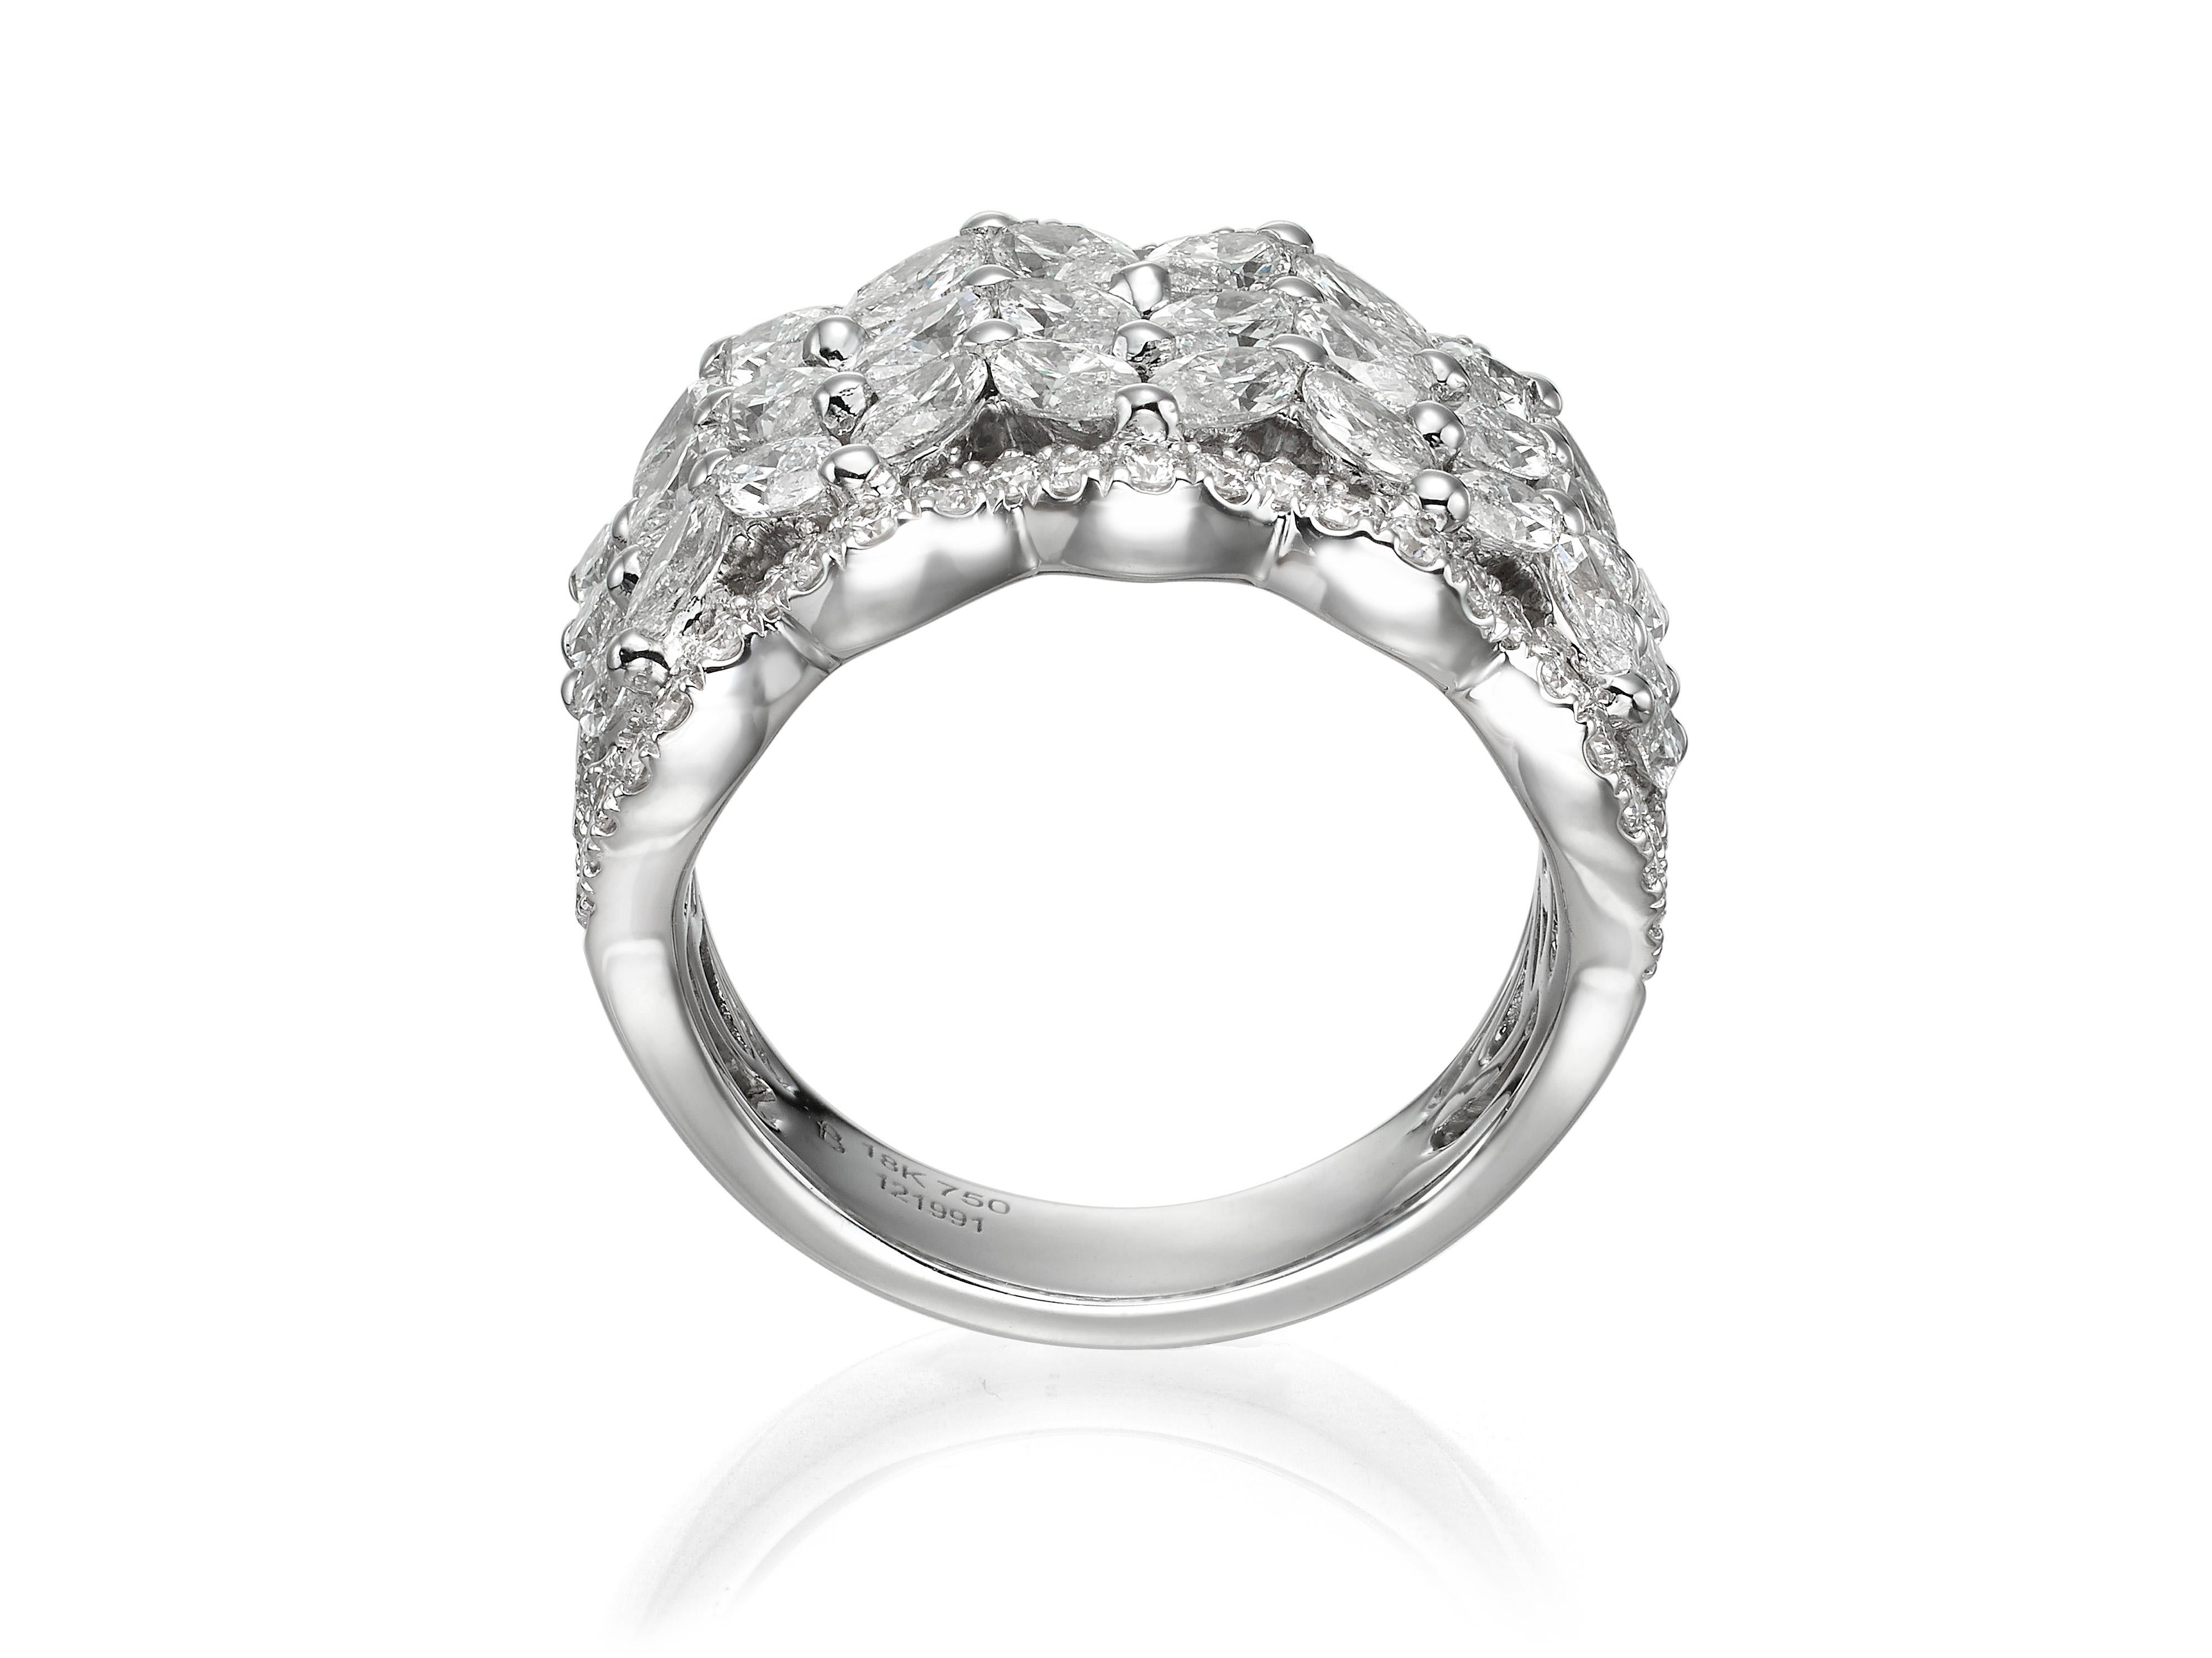 Handmade from 18K white gold, encrusted with 2.78 carats of marquise shape diamonds and 0.83 carats of round brilliant cut diamonds.  An elegant choice for a bride and perfectly complements the Butani 6.24 Carat Marquise and Round 18 Karat White